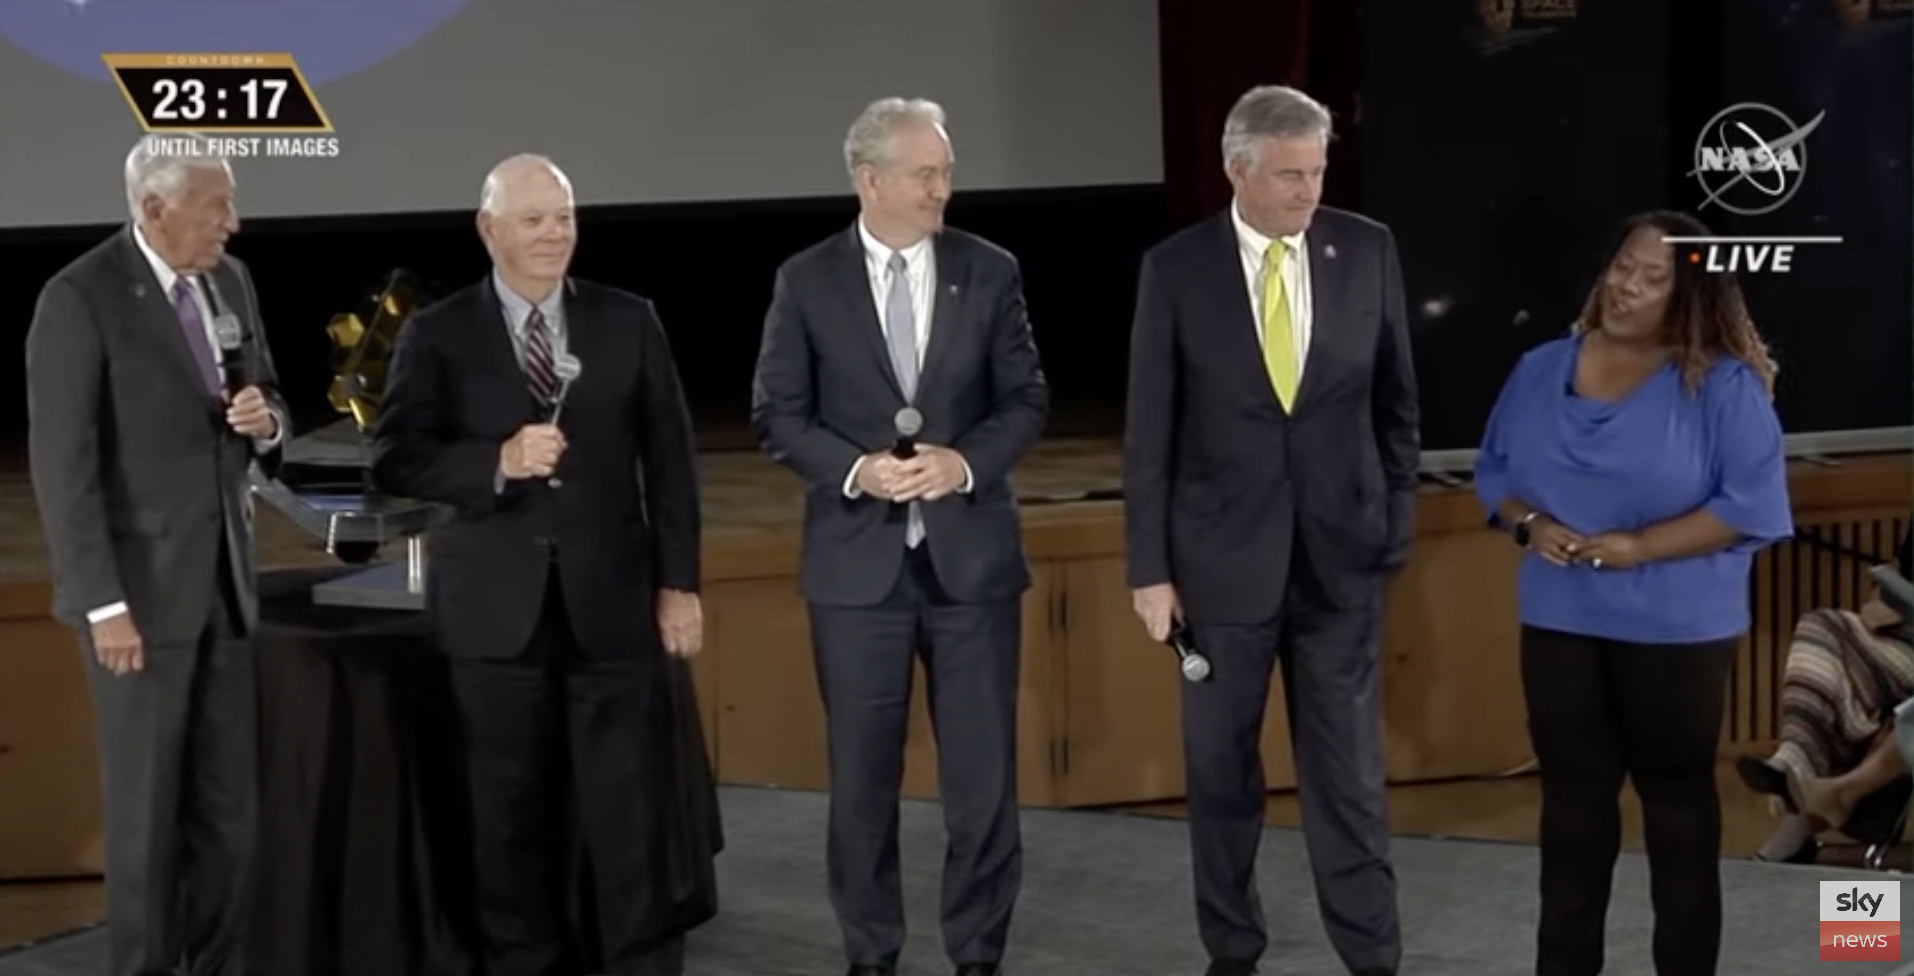 Four US congressmen in suits standing on stage at NASA Goddard